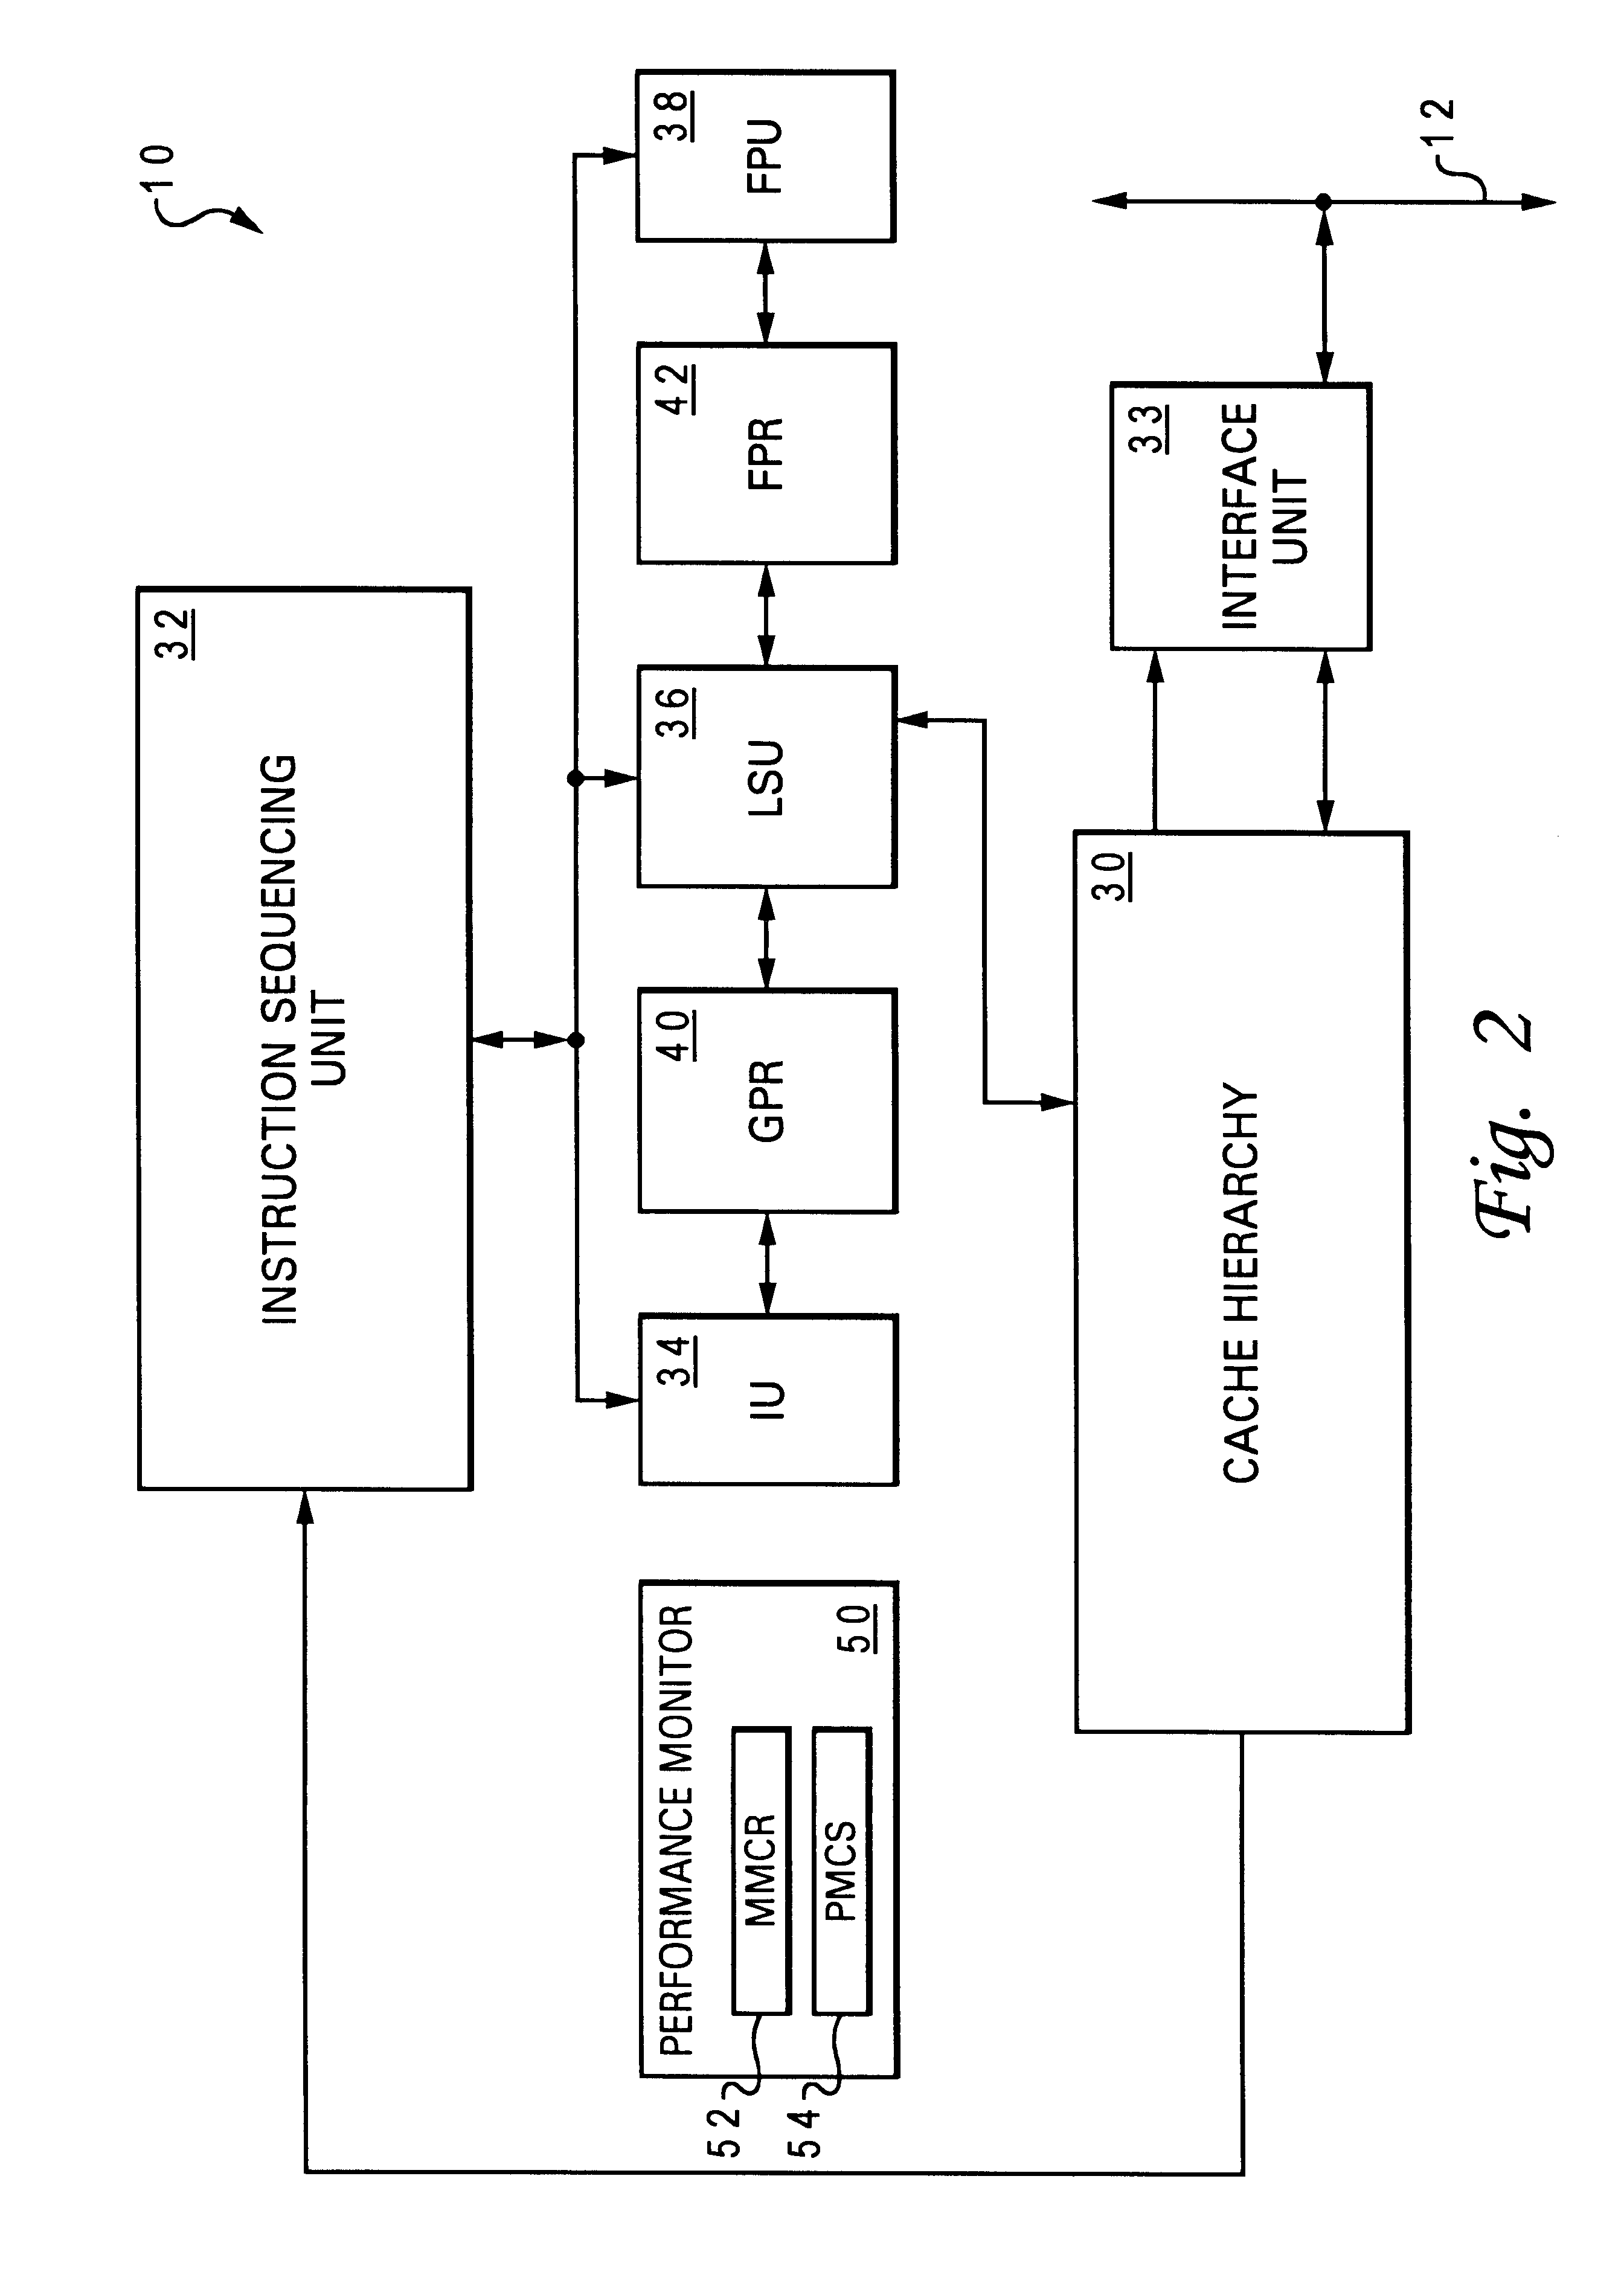 Cache management mechanism to enable information-type dependent cache policies